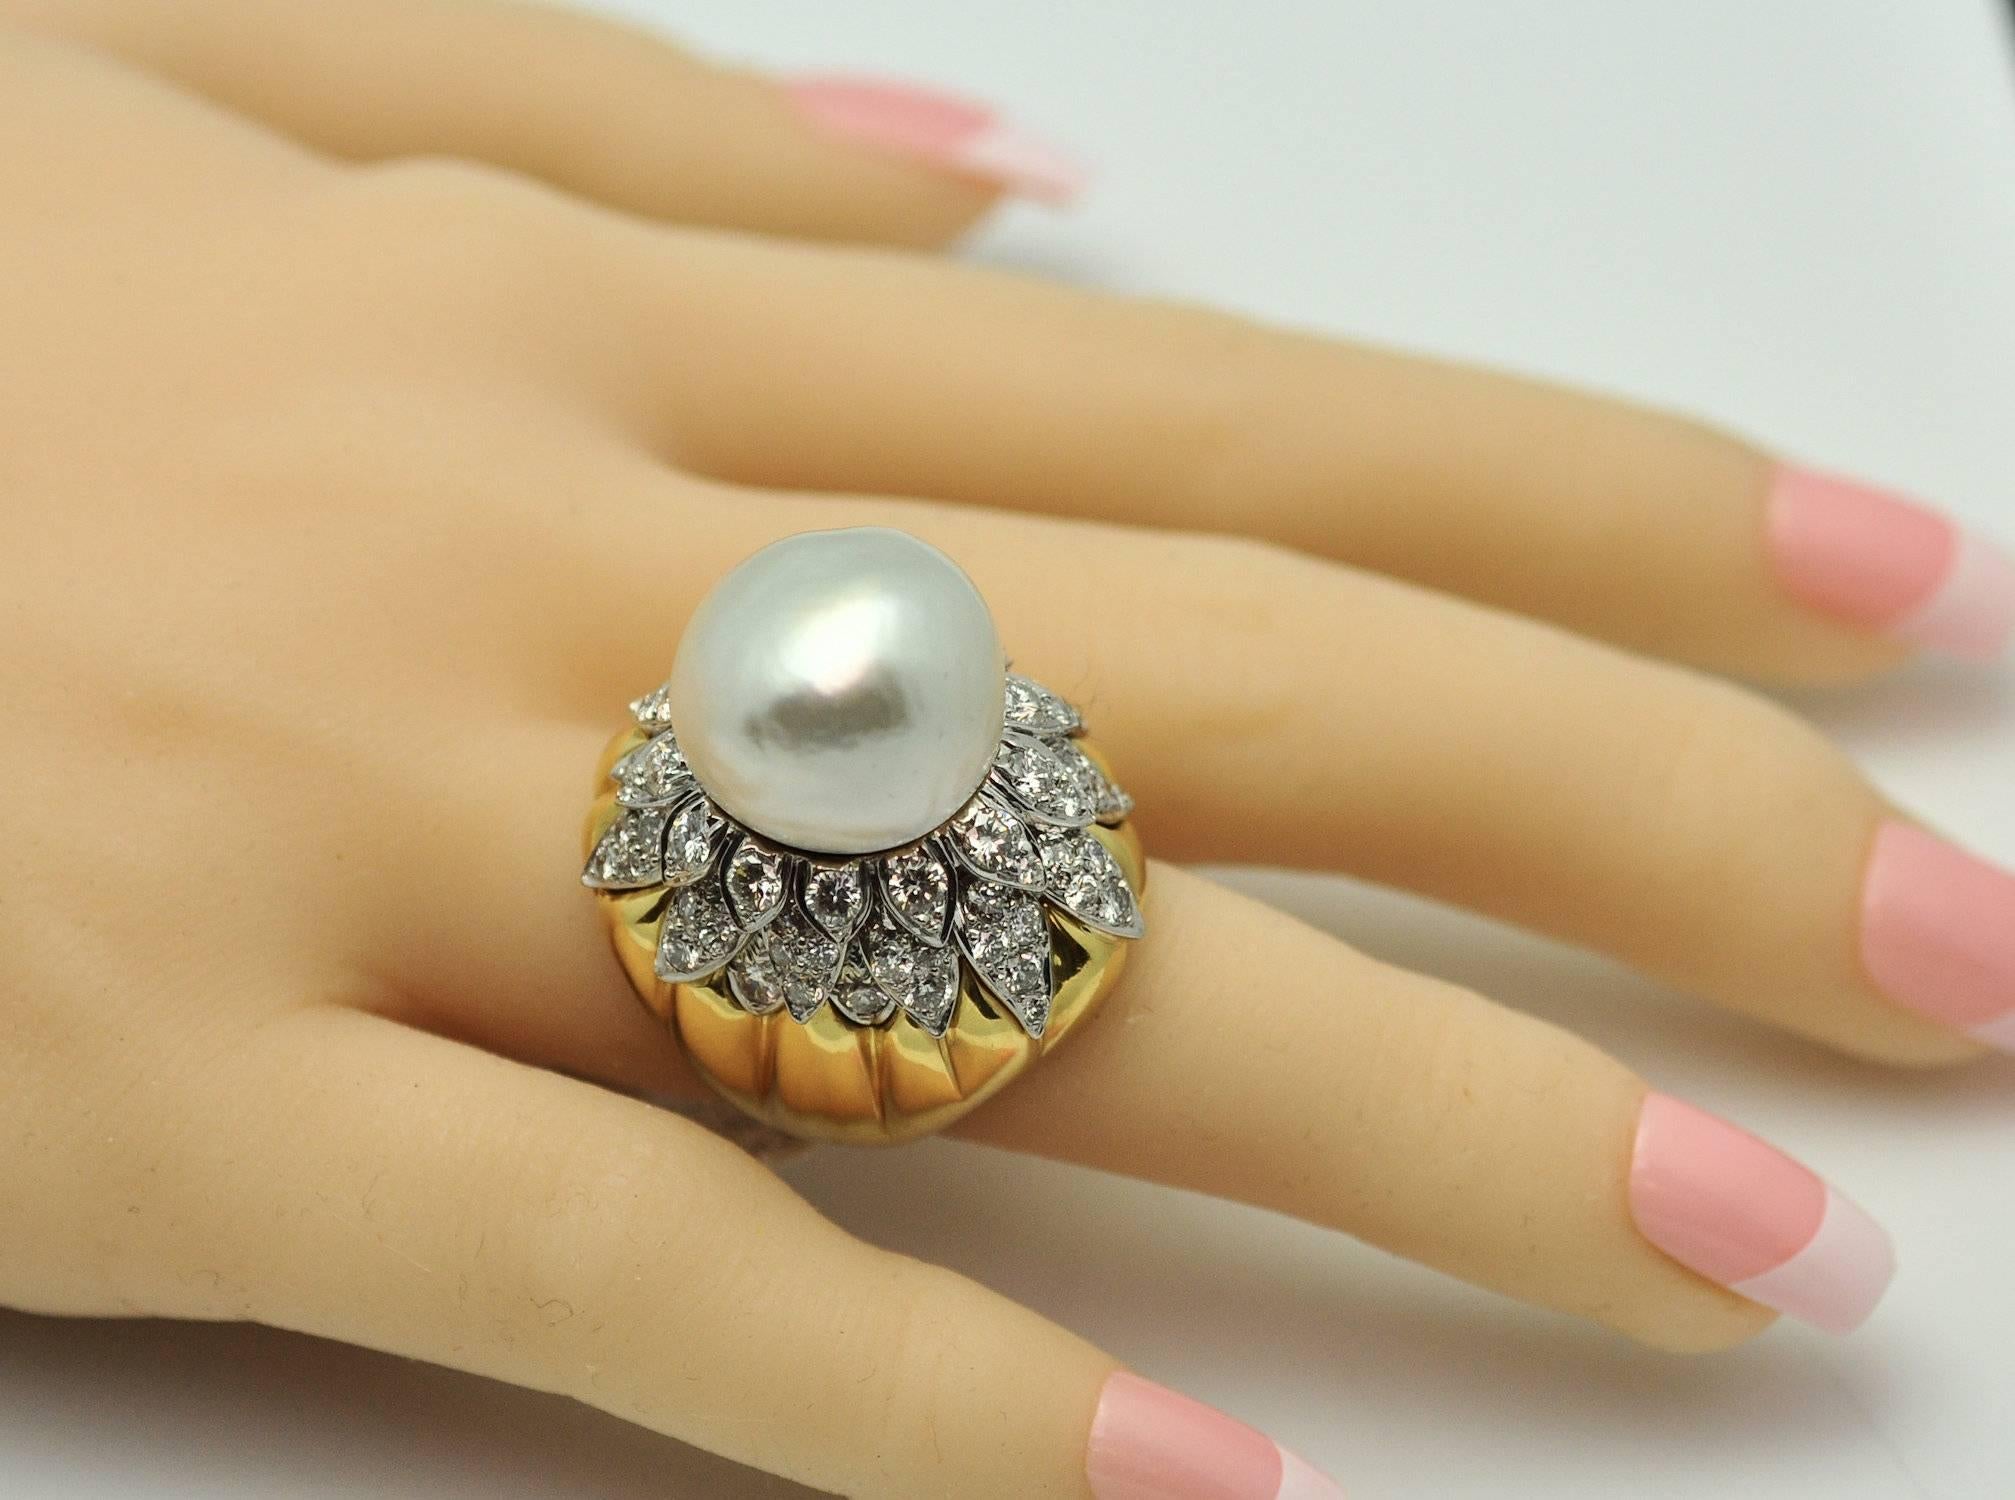 A spectacular statement ring with large baroque South Sea cultured pearl measuring 17.8 mm. with overlapping petals of diamond set on a bed of gold. There are 82 round diamonds with a total weight of approx. 5.00 ct. VS-2, G.  Beautifully made in